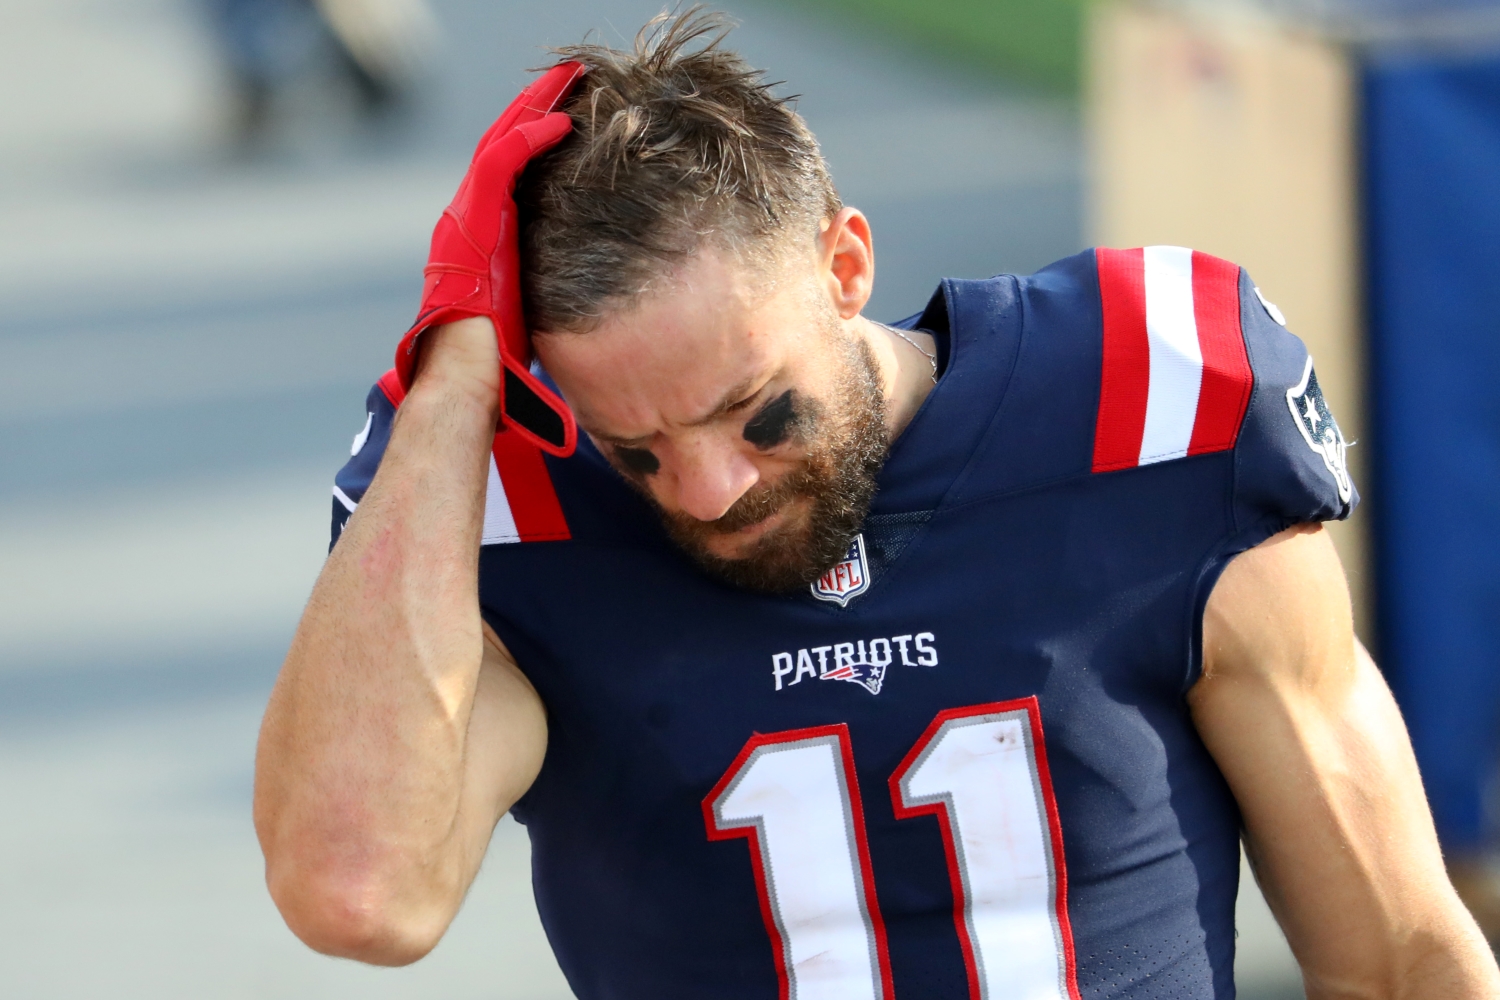 Julian Edelman of the New England Patriots looks on after the game against the Denver Broncos.